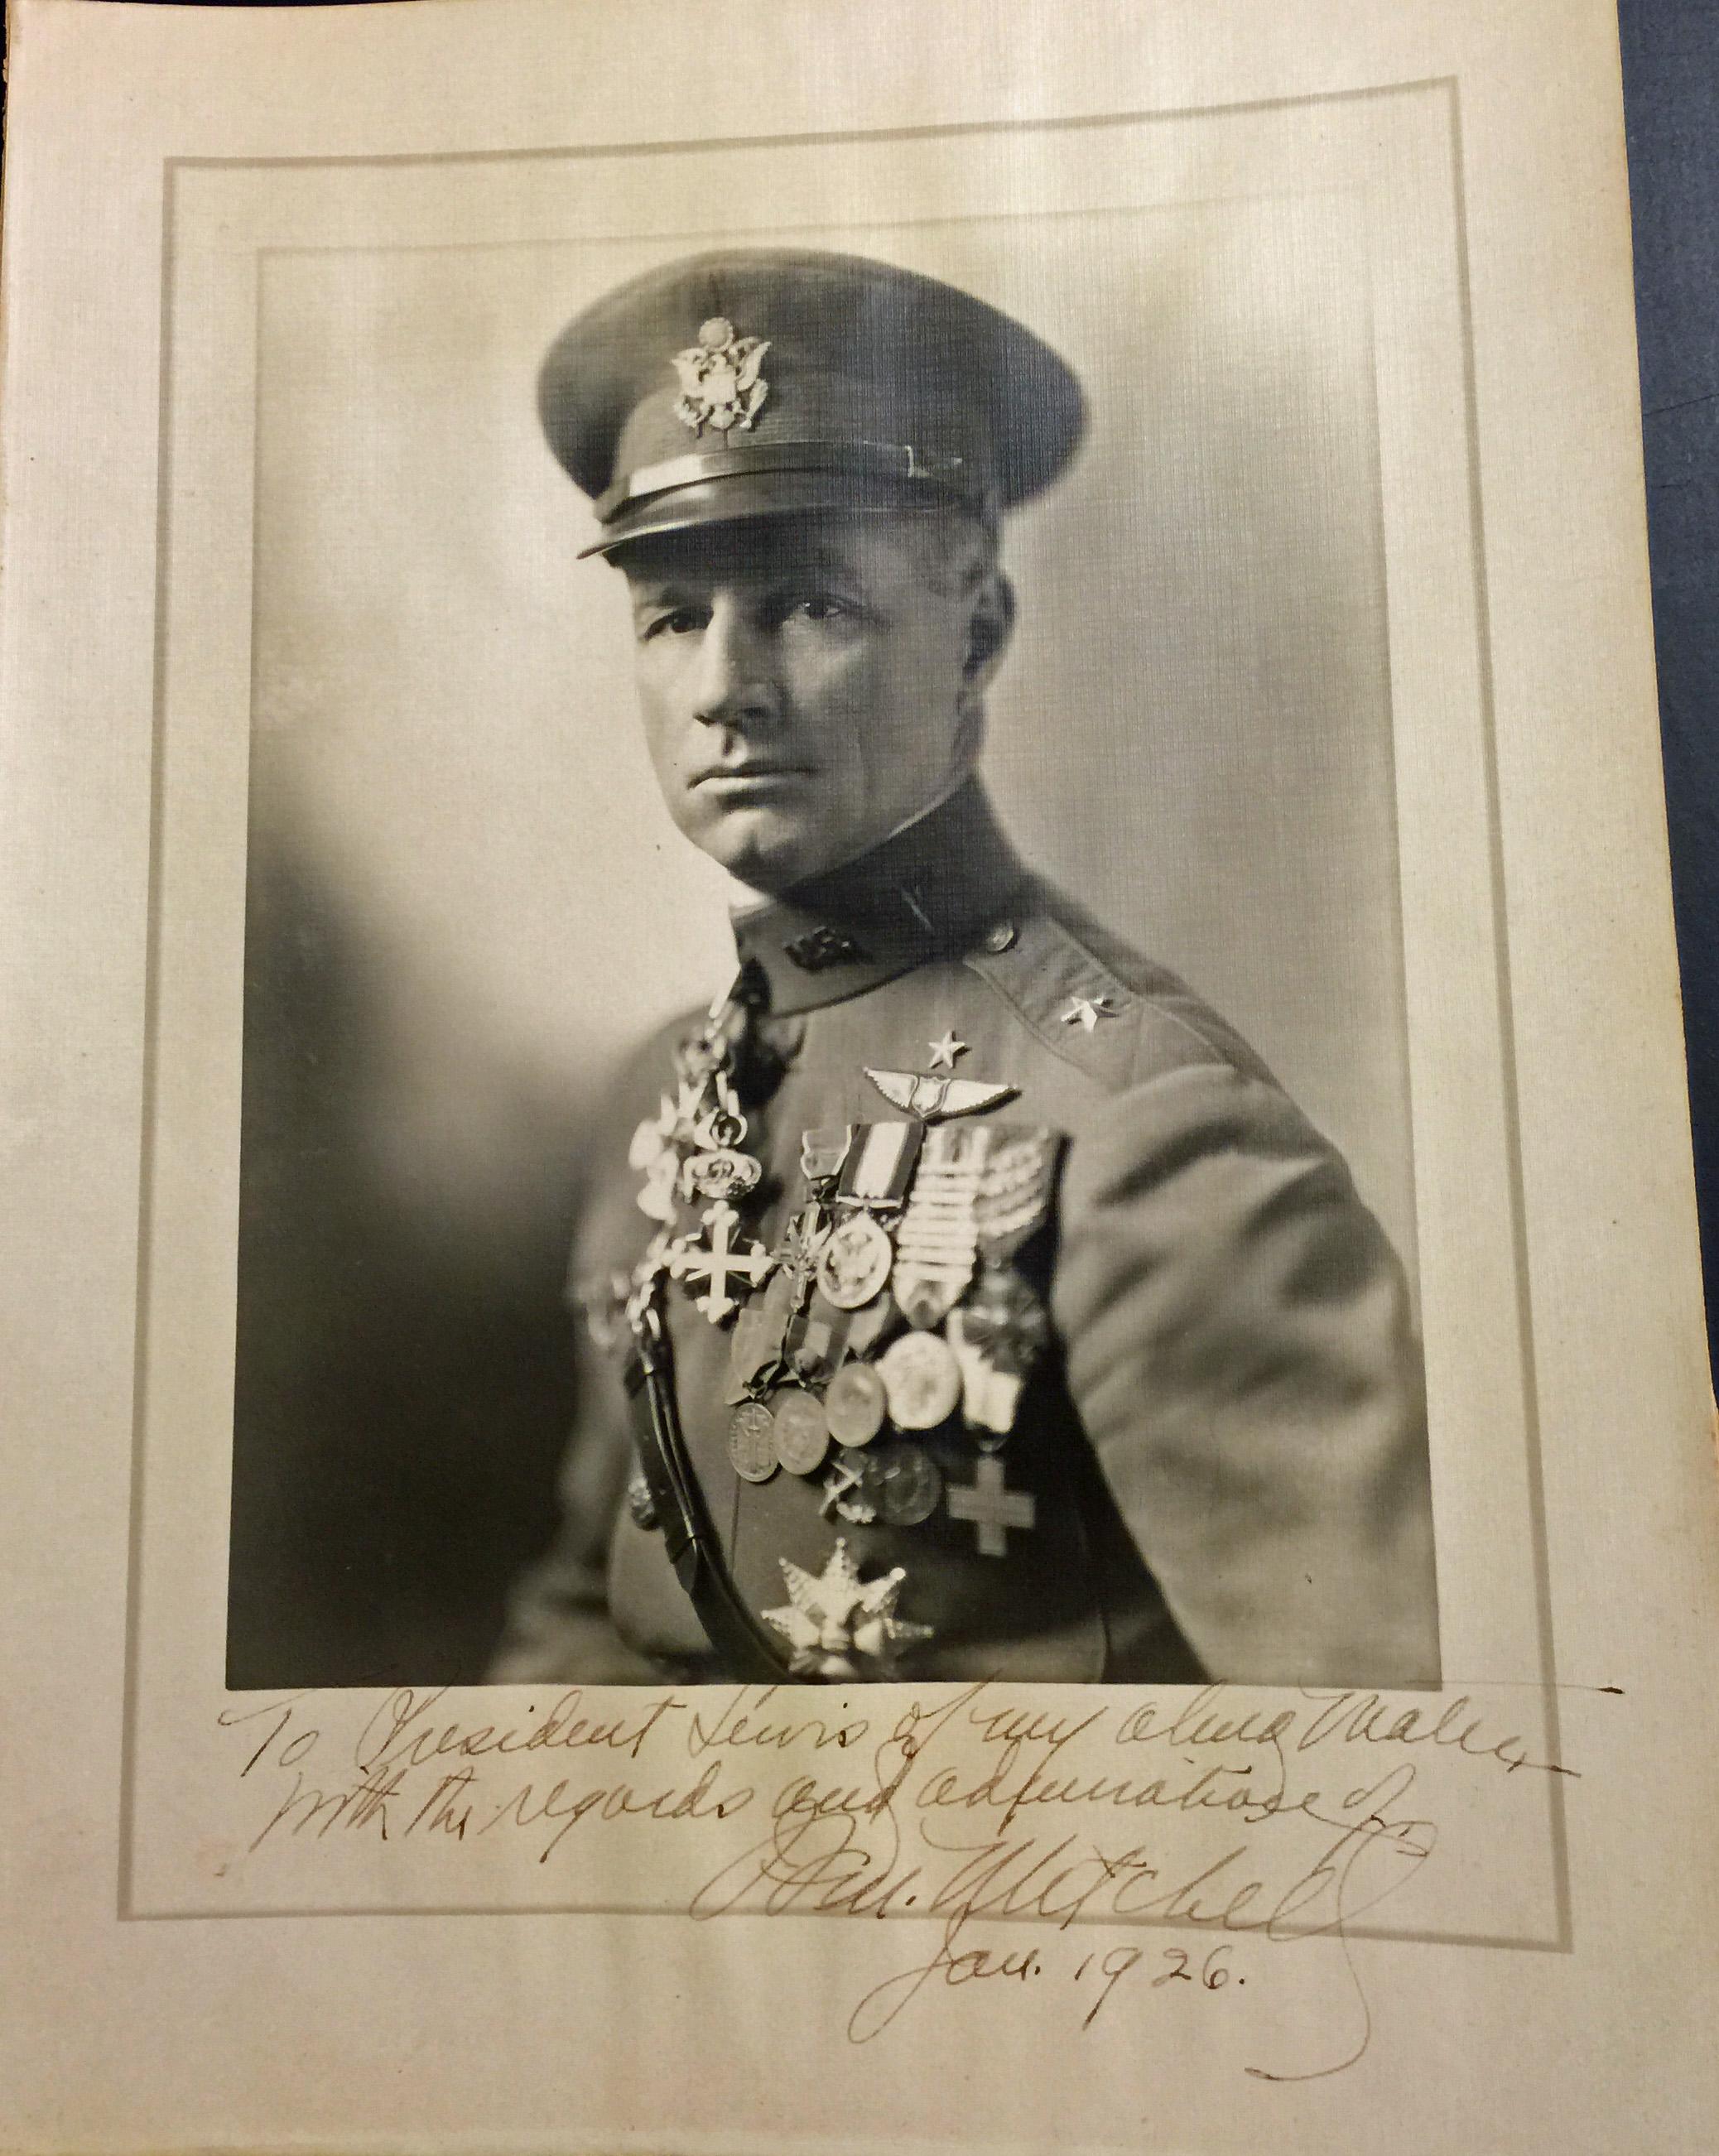 GENERAL BILLY MITCHELL - SIGNED AND INSCRIBED PHOTO DATED JANUARY, 1926 - Photograph by Unknown